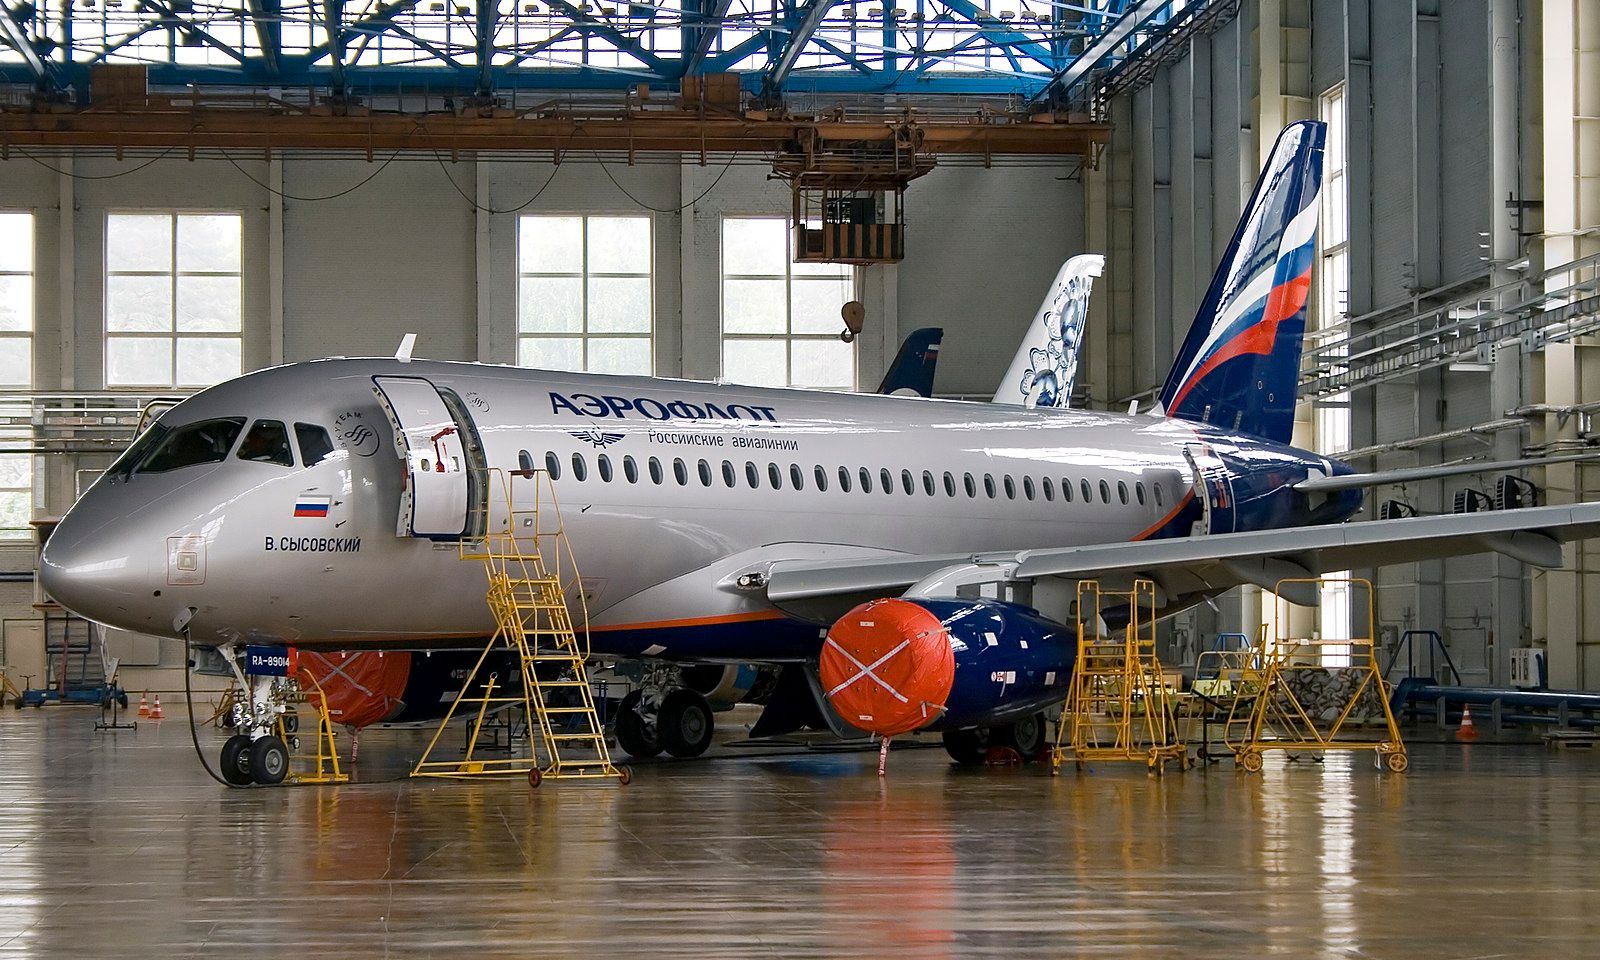 Sukhoi Superjet in hangar with engines covered